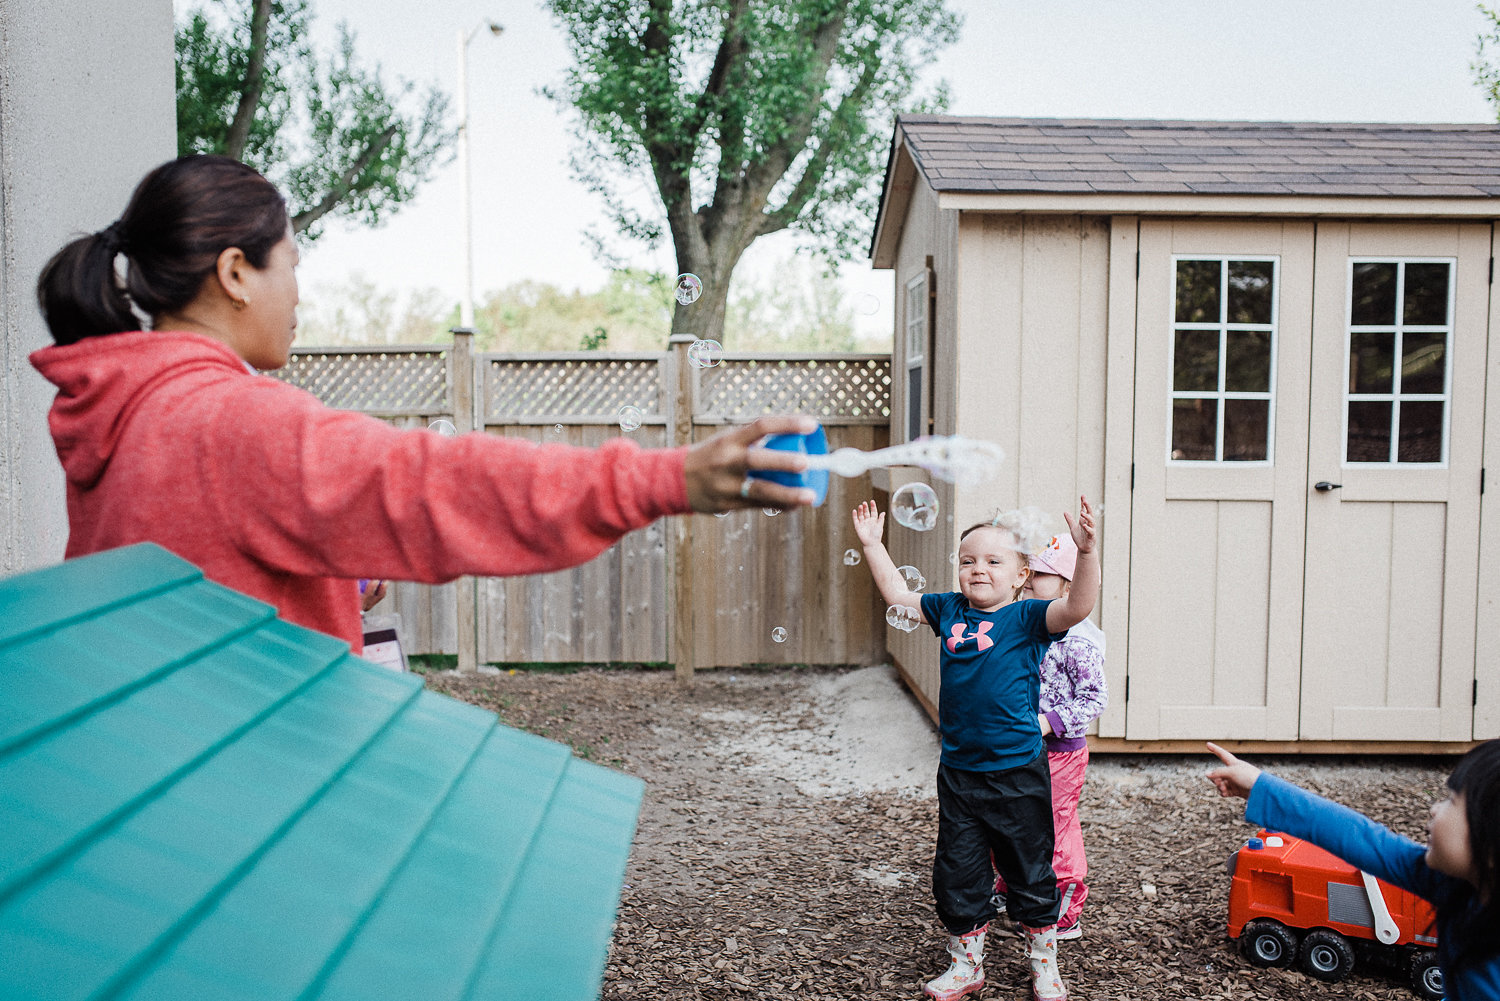 A daycare teacher is making bubble for children in the backyard